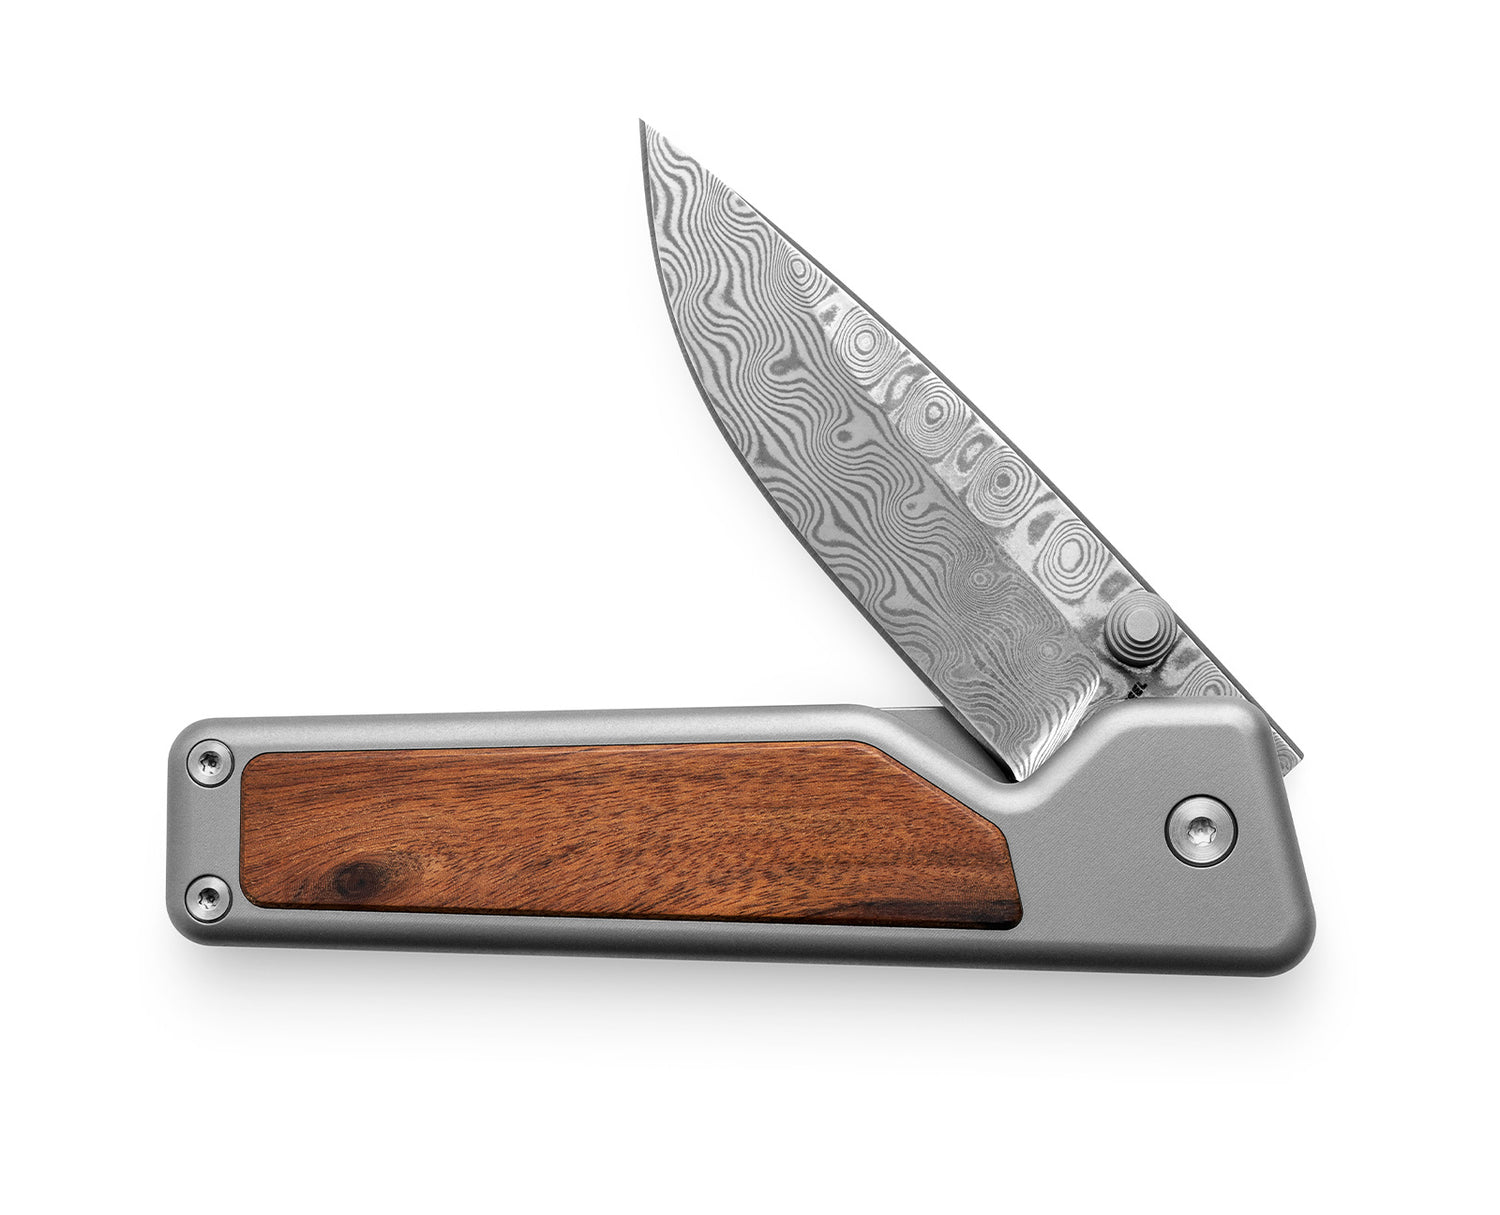 The Chapter knife with rosewood handle and decorative stainless steel blade.